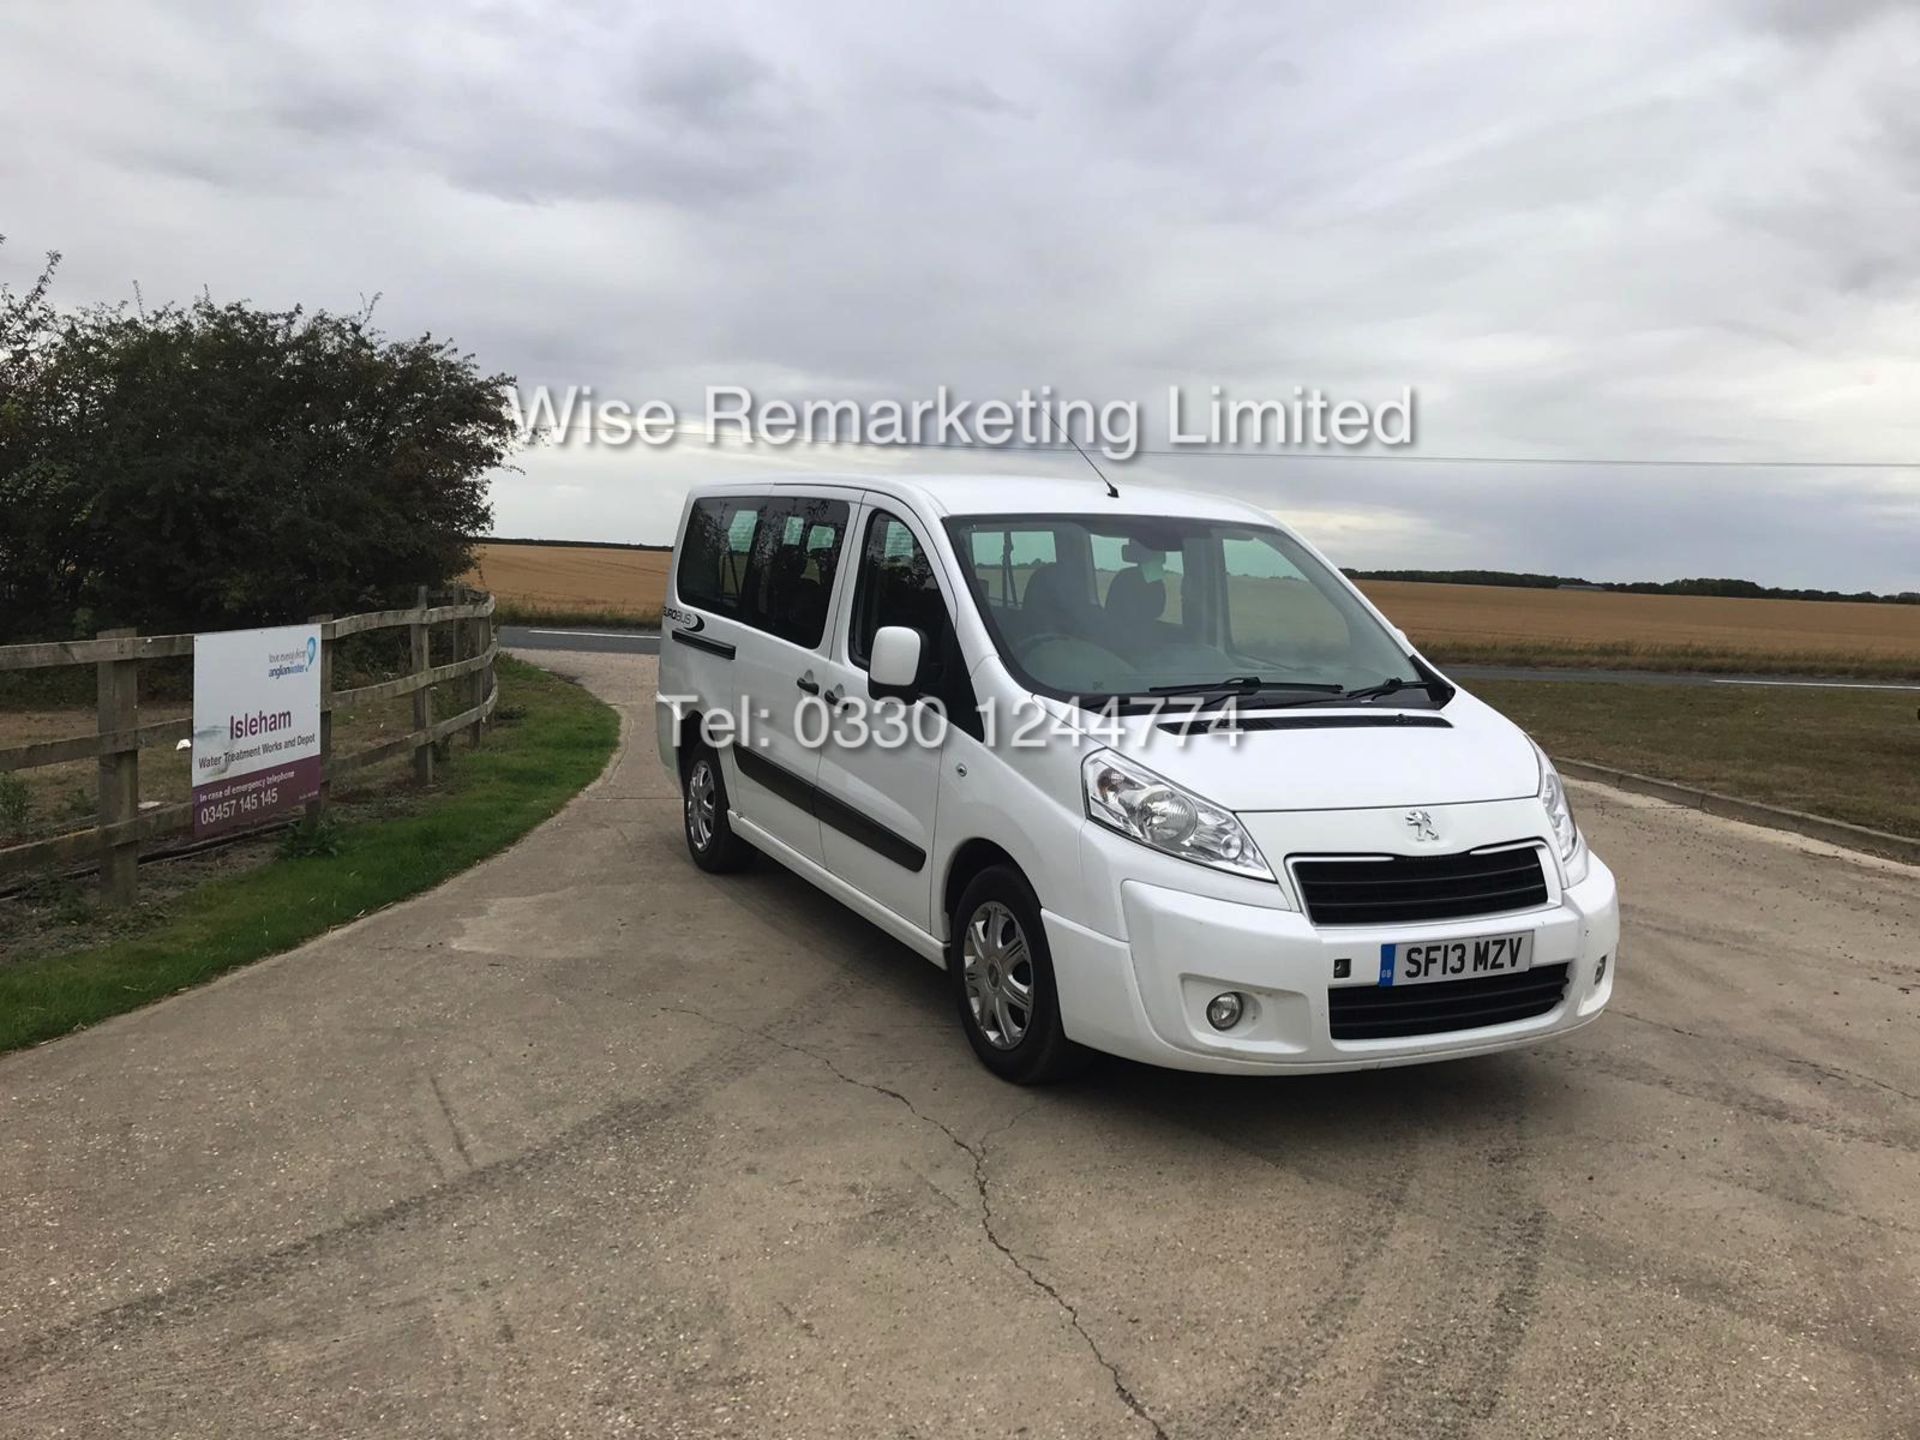 PEUGEOT EUROBUS S *MPV 8 SEATER* 2.0l (2013 - 13 REG) **AIR CON** - 1 OWNER FROM NEW - Image 4 of 19